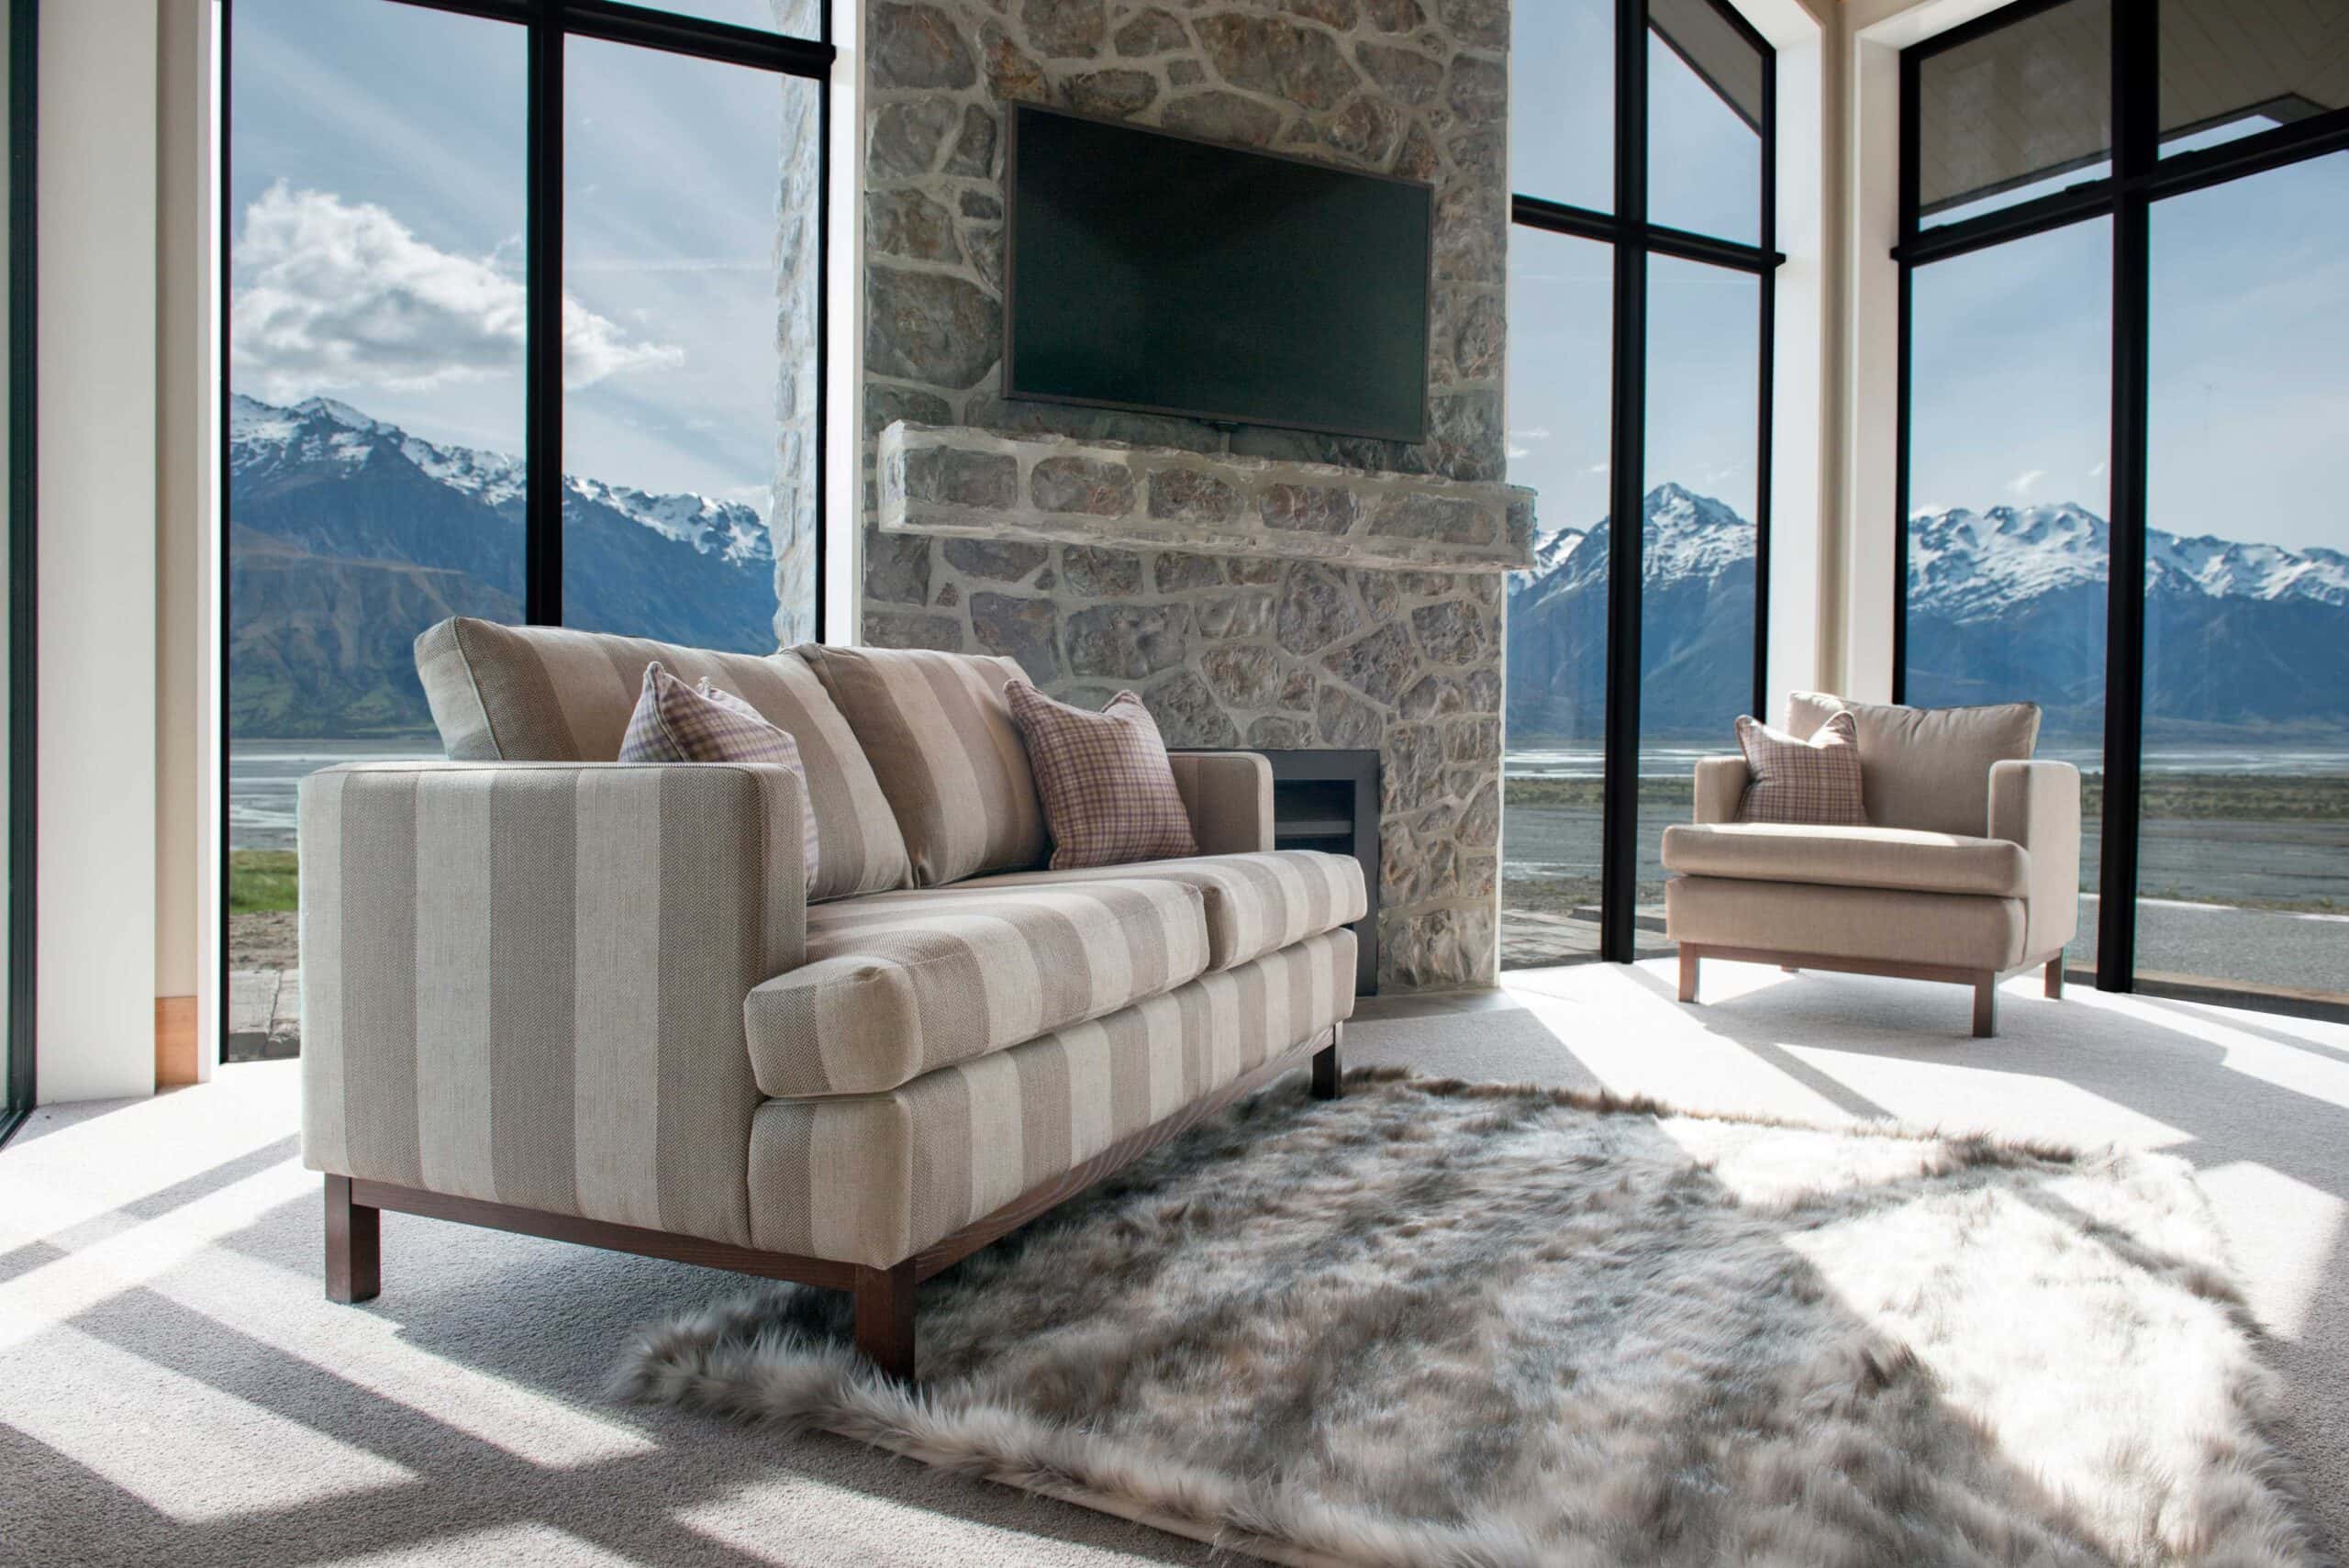  Montreux Furniture Peyton sofa and chairs look wonderful in this setting.